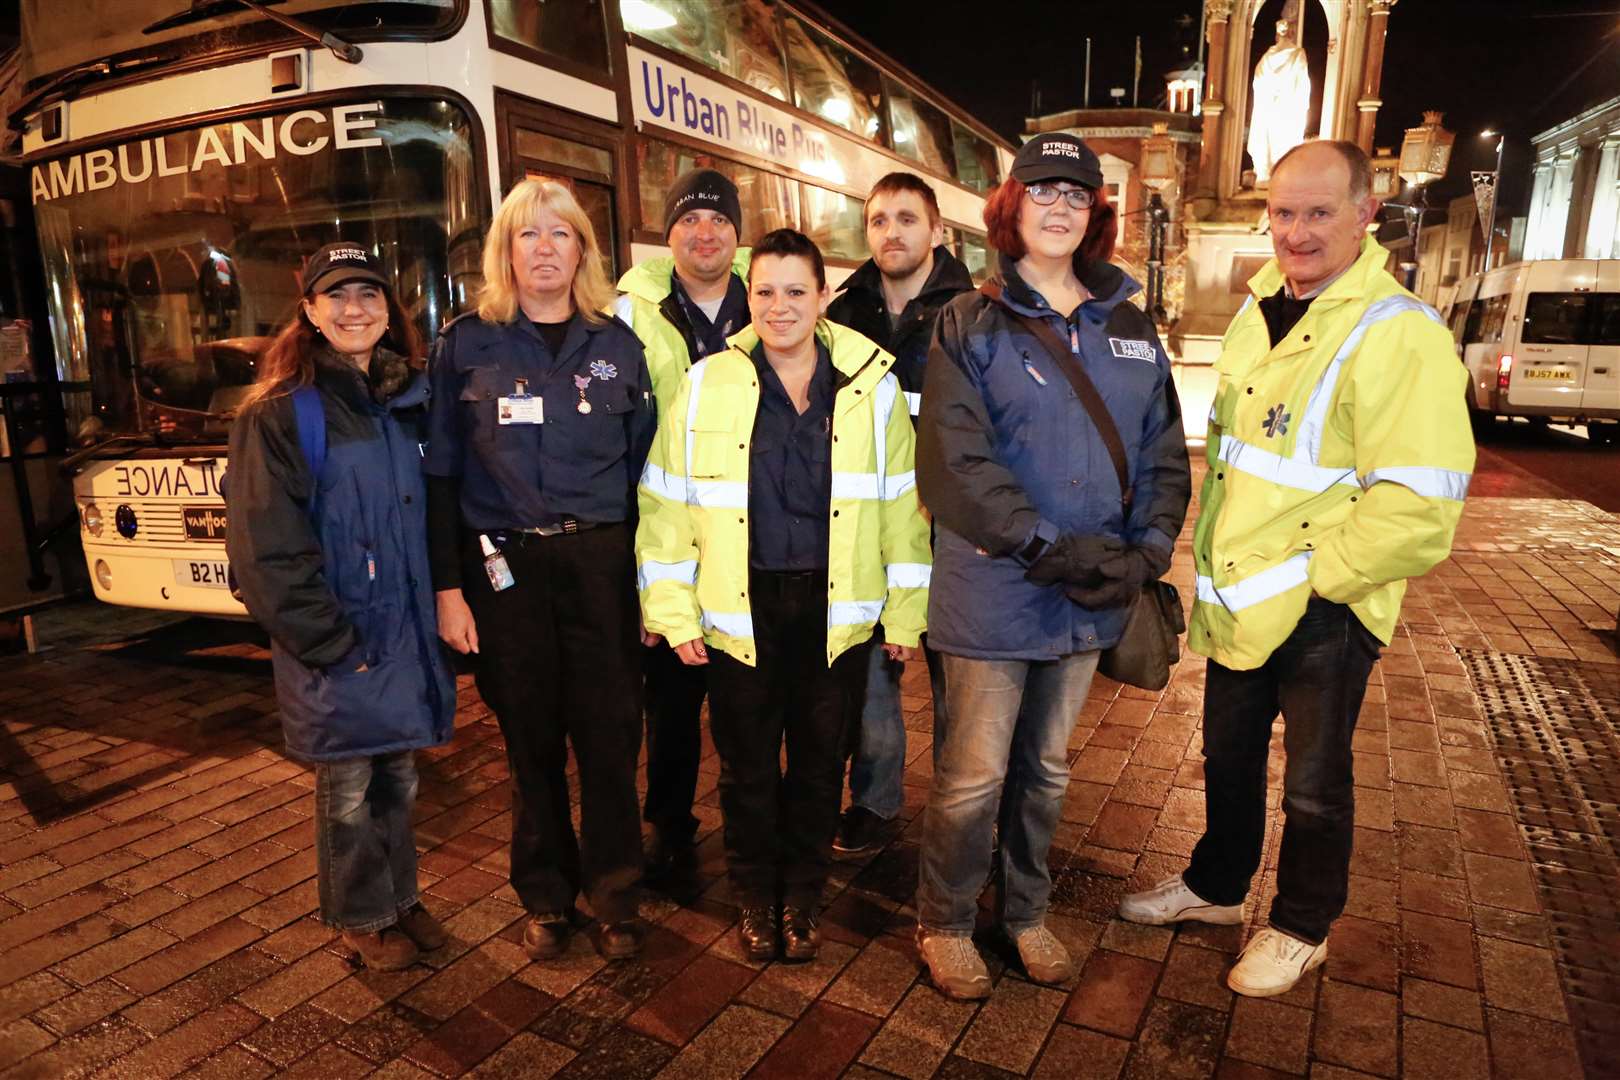 The street pastors with some of the Urban Blue bus team